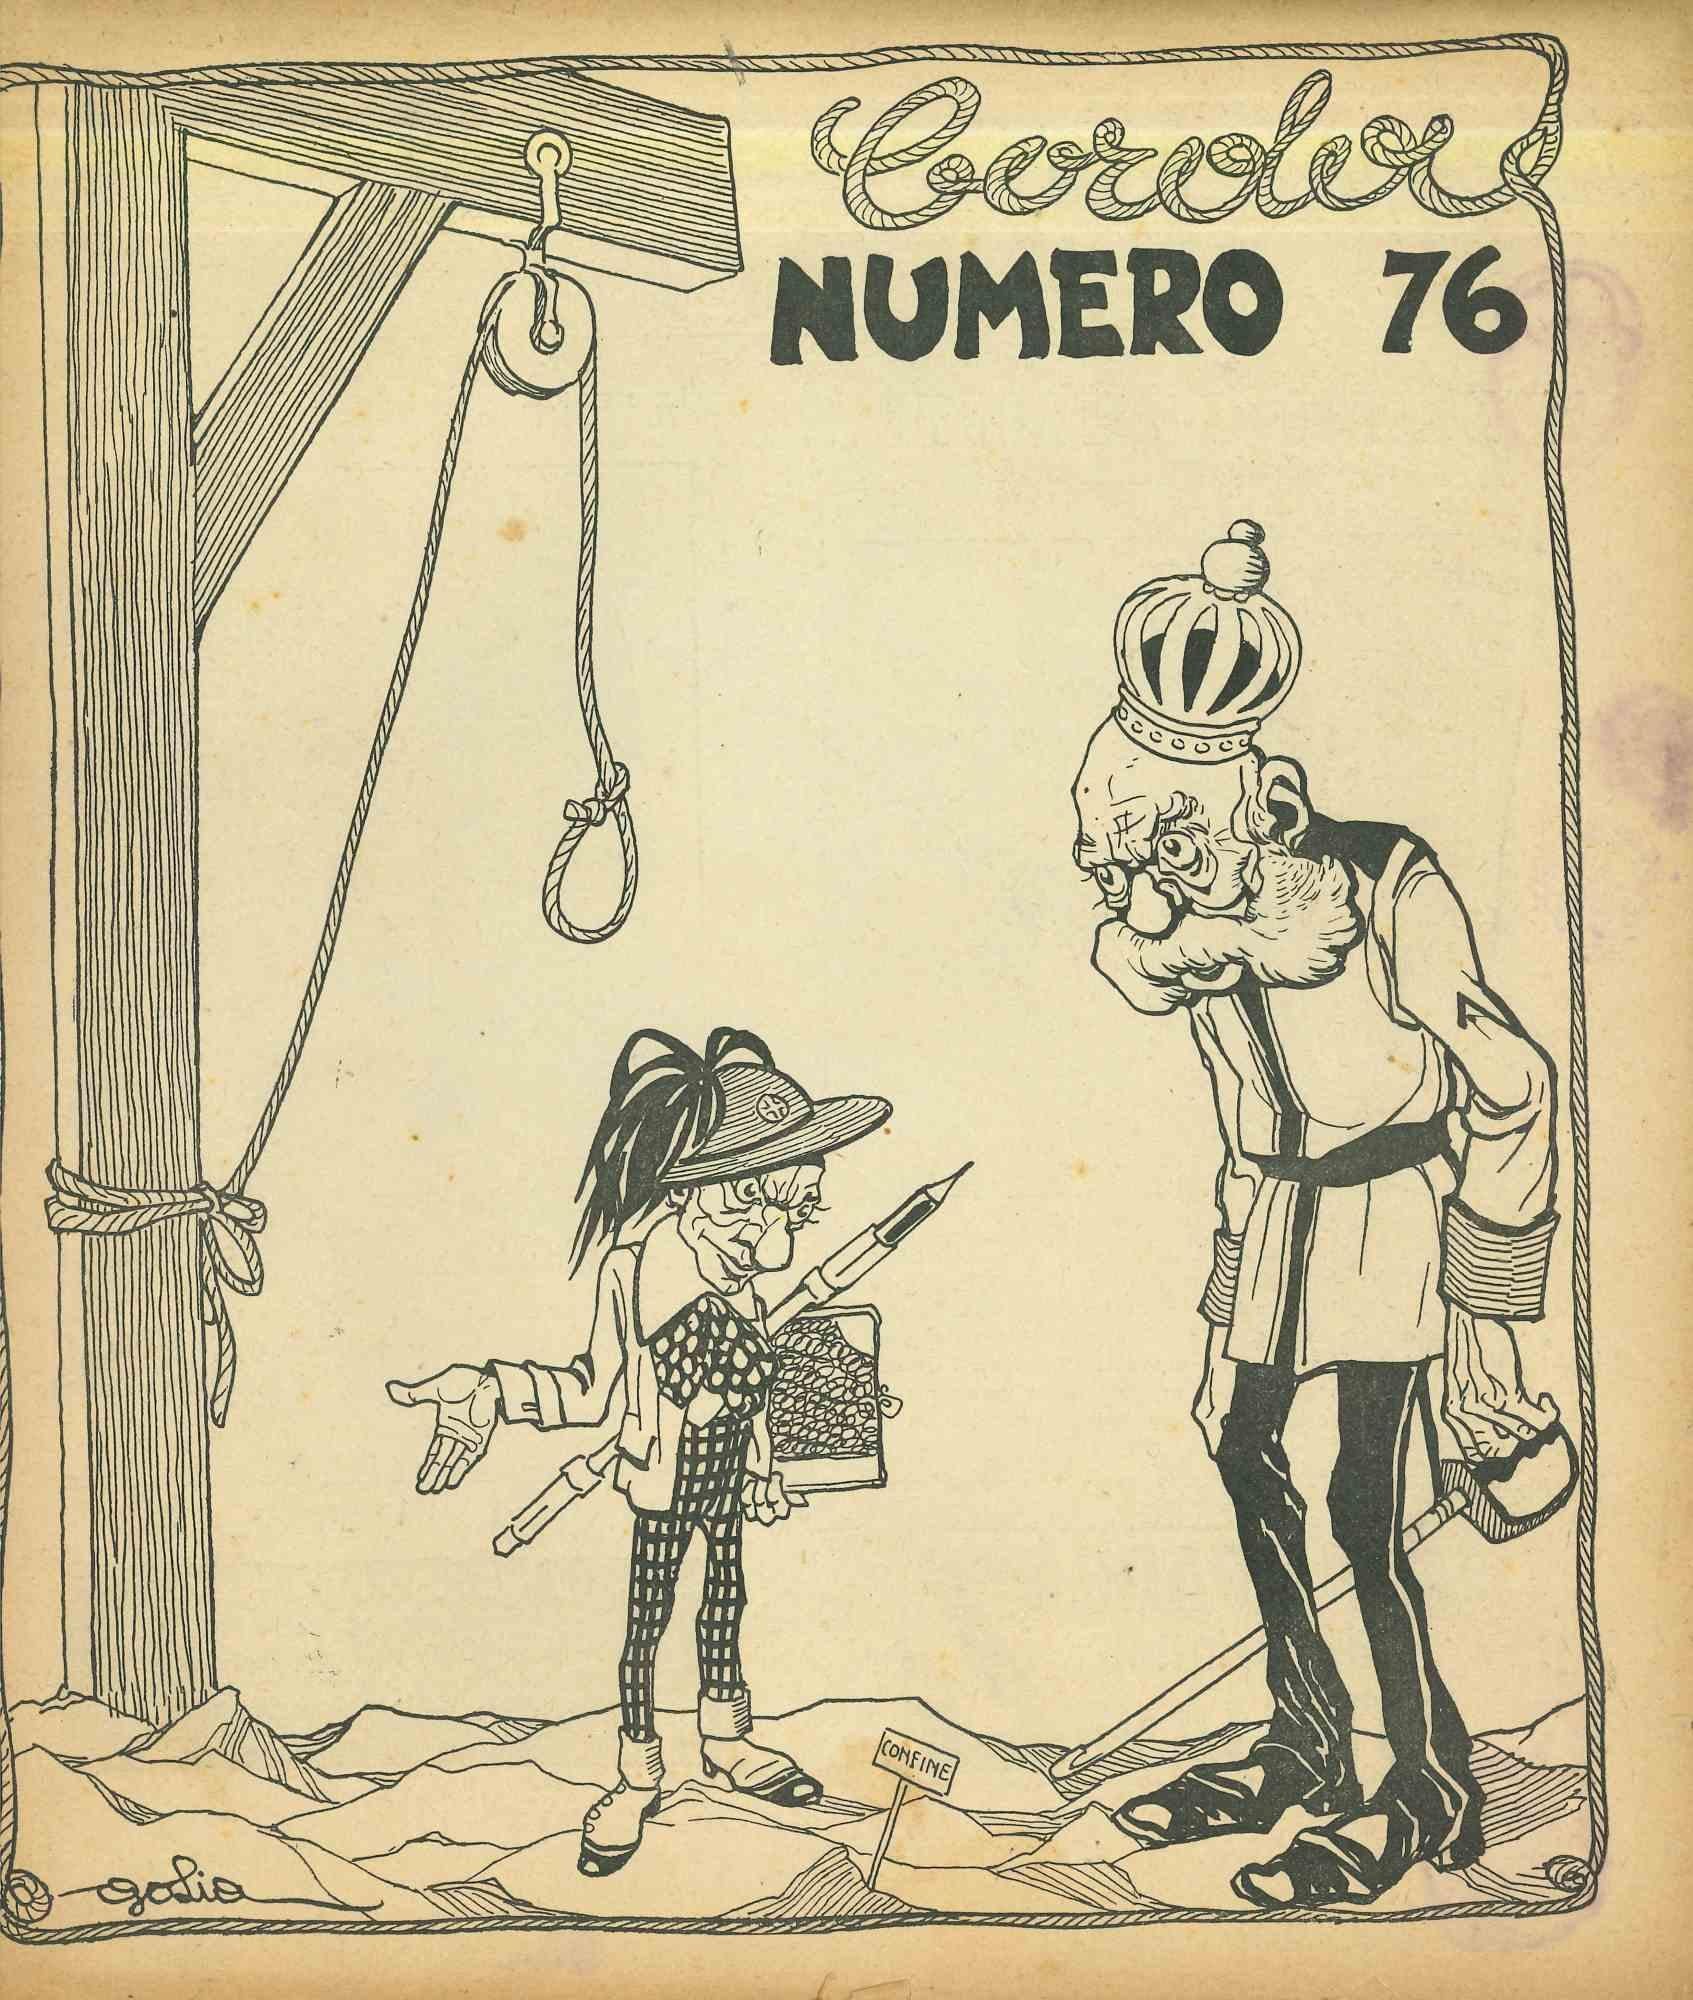 Magazine "Numero" number 76 - Original Lithograph - 1910s - Art by Unknown